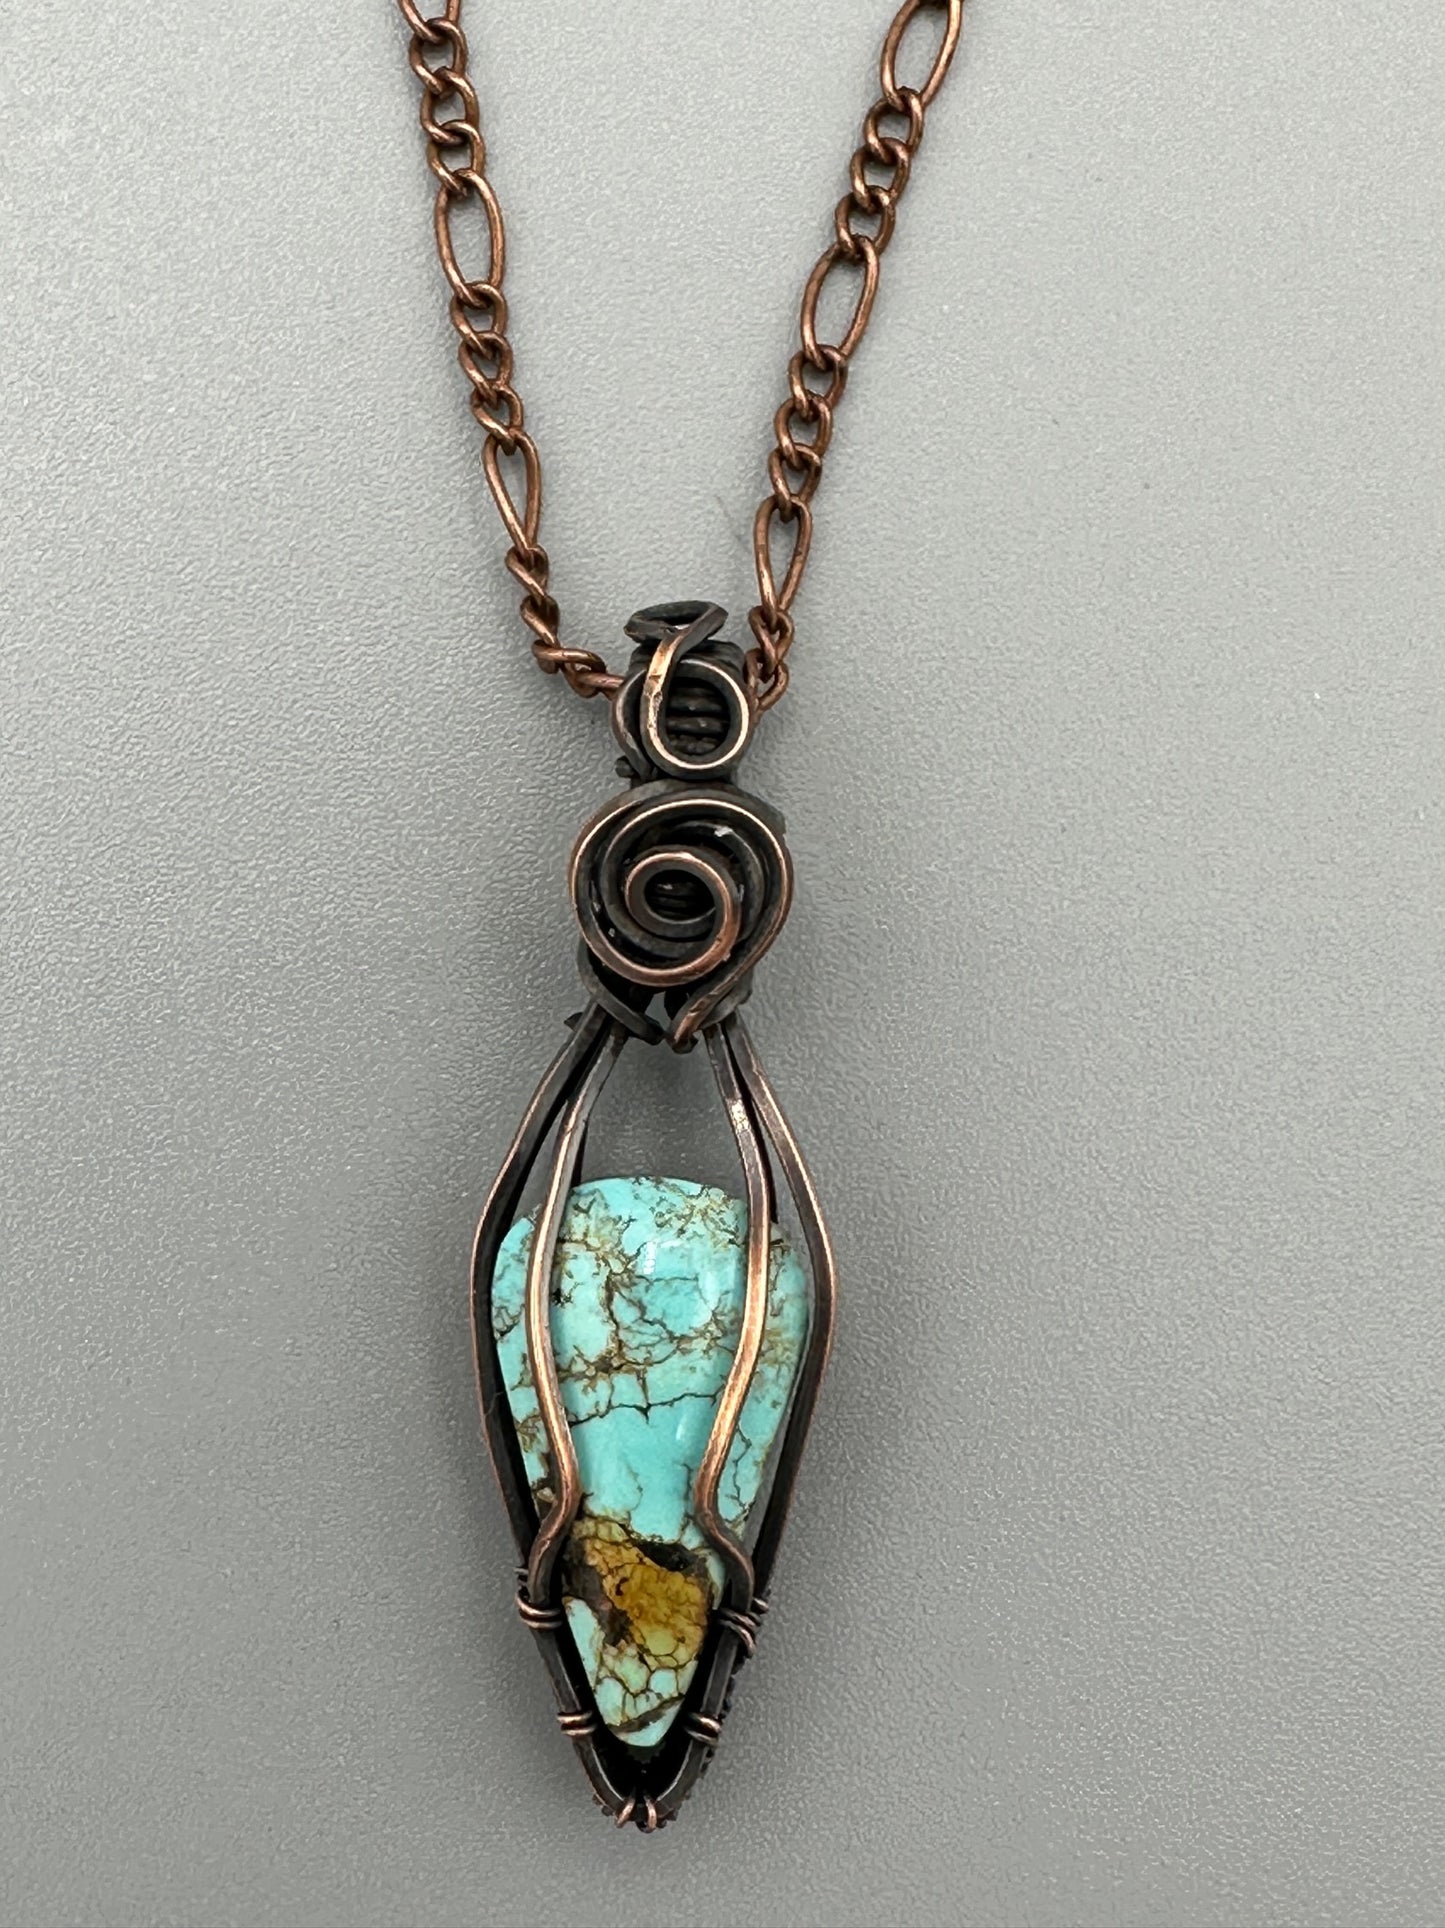 Handmade Turquoise Teardrop Wire Wrapped and Woven Pendant